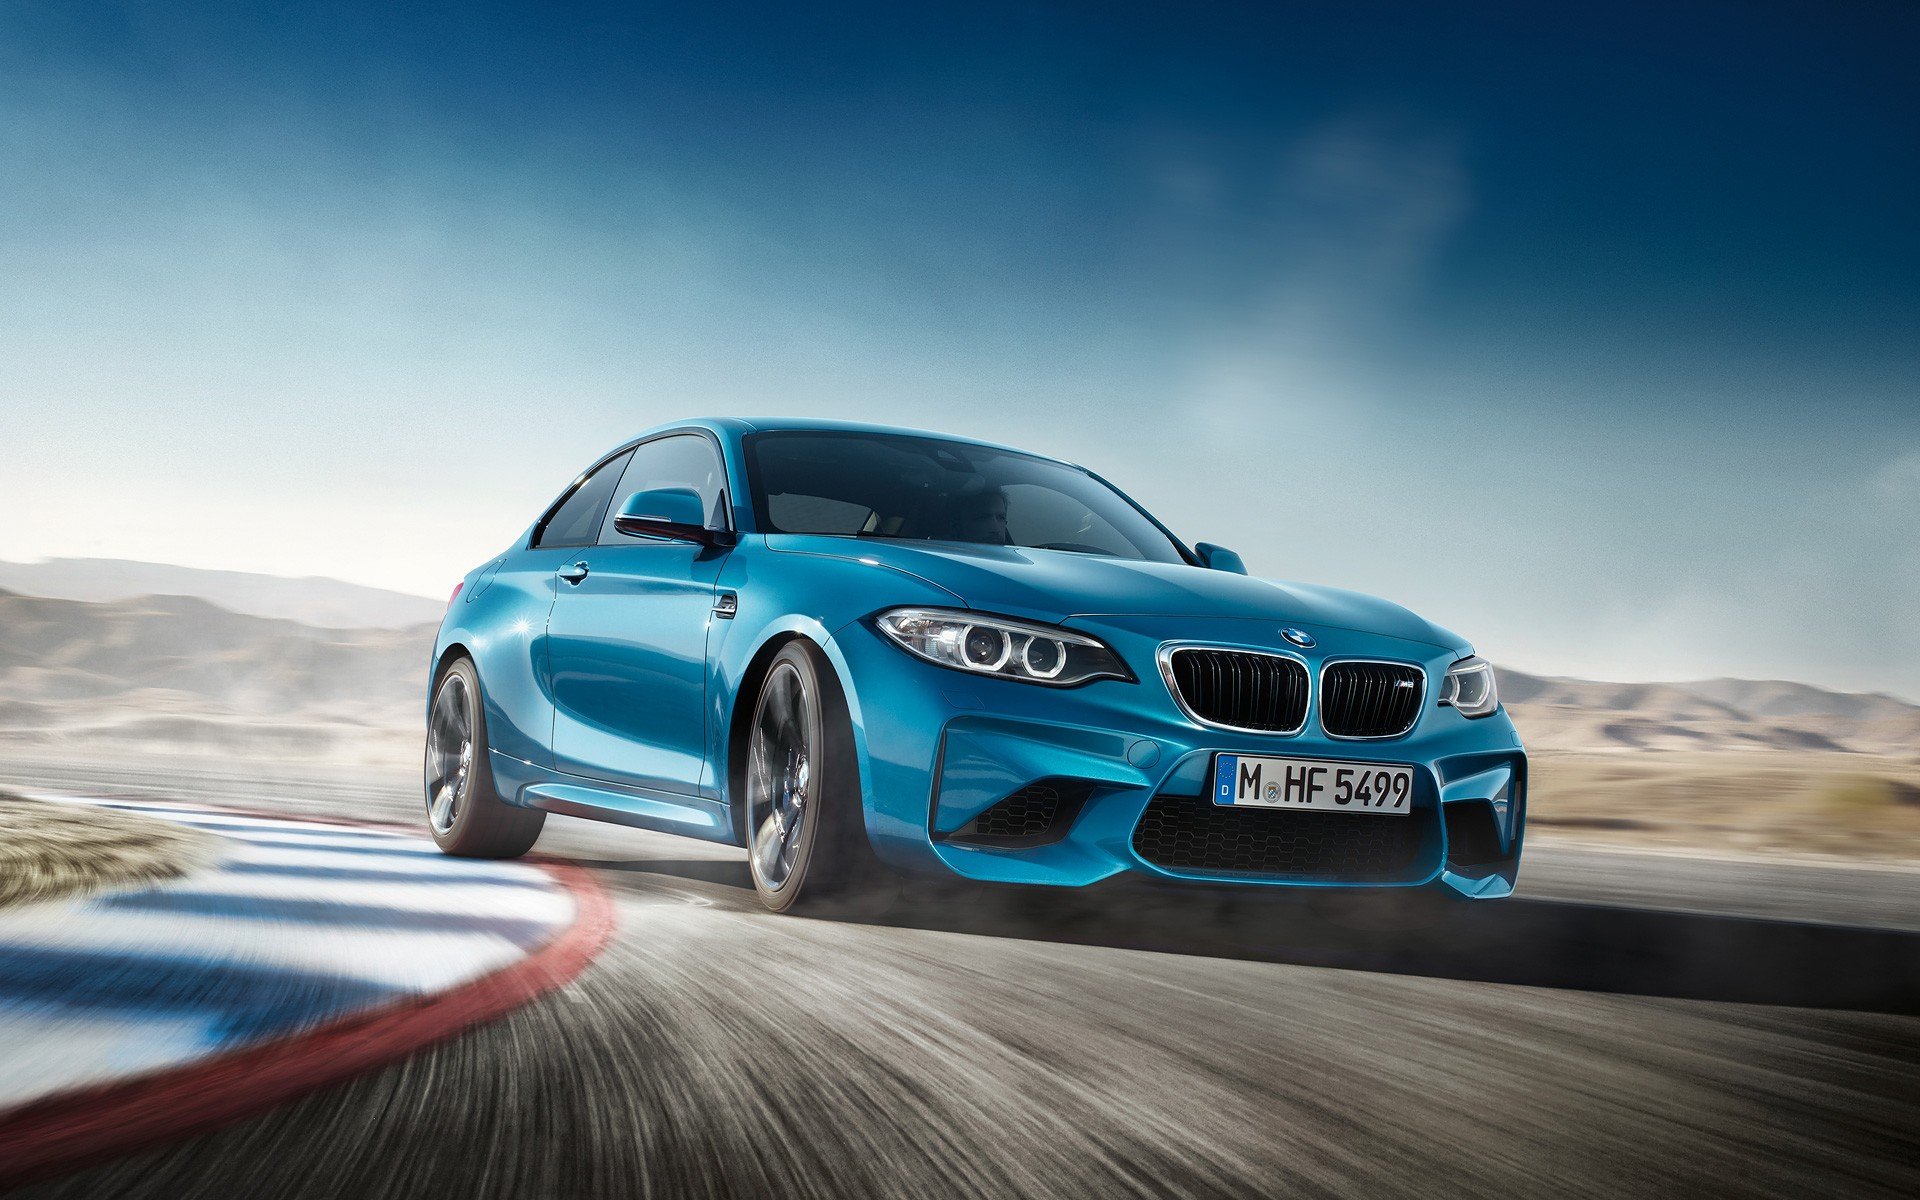 Get Your BMW M2 Wallpaper Fresh Out the Oven